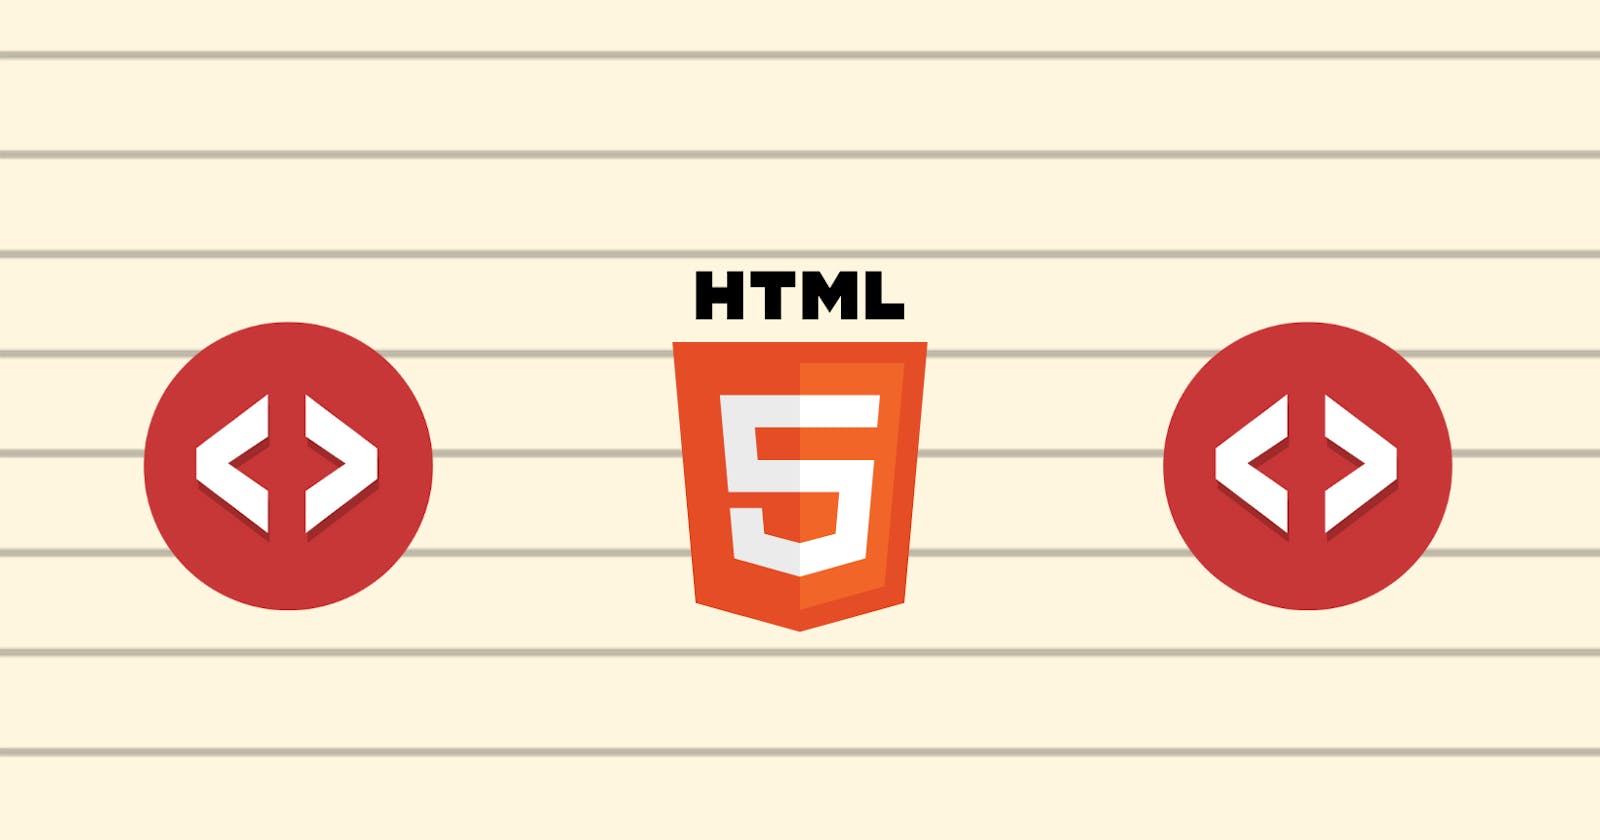 Build your first HTML webpage in under 30 minutes